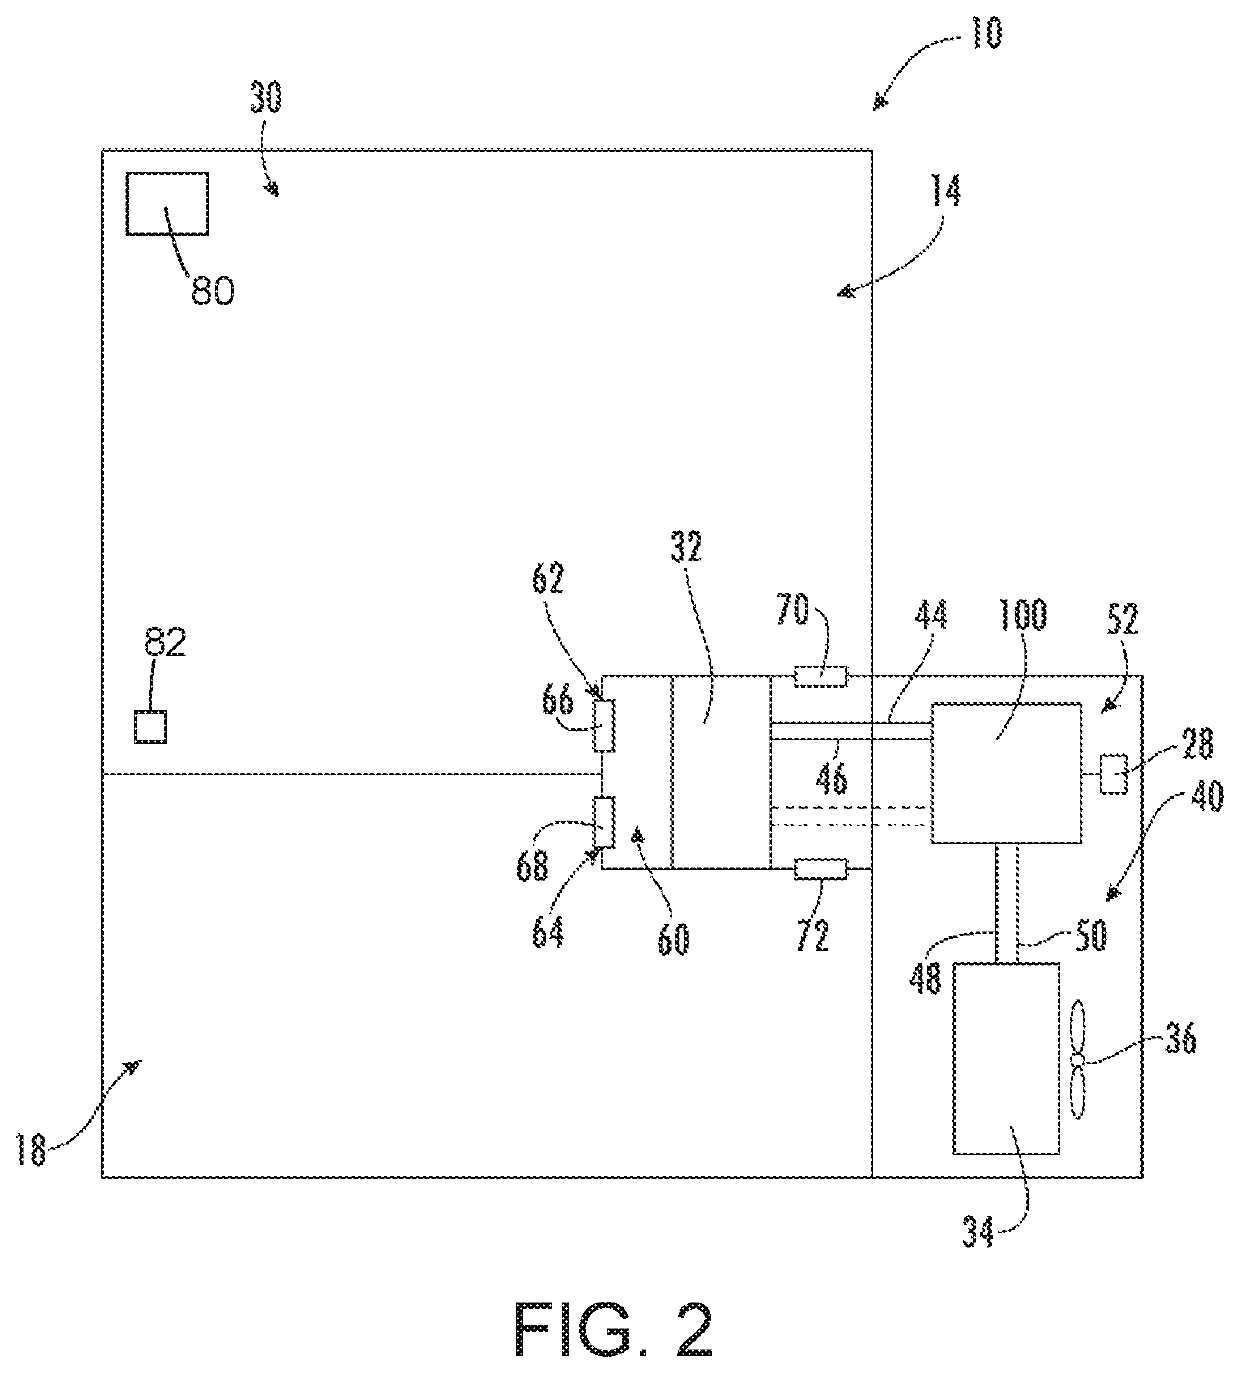 Variable temperature magneto-caloric thermal diode assembly